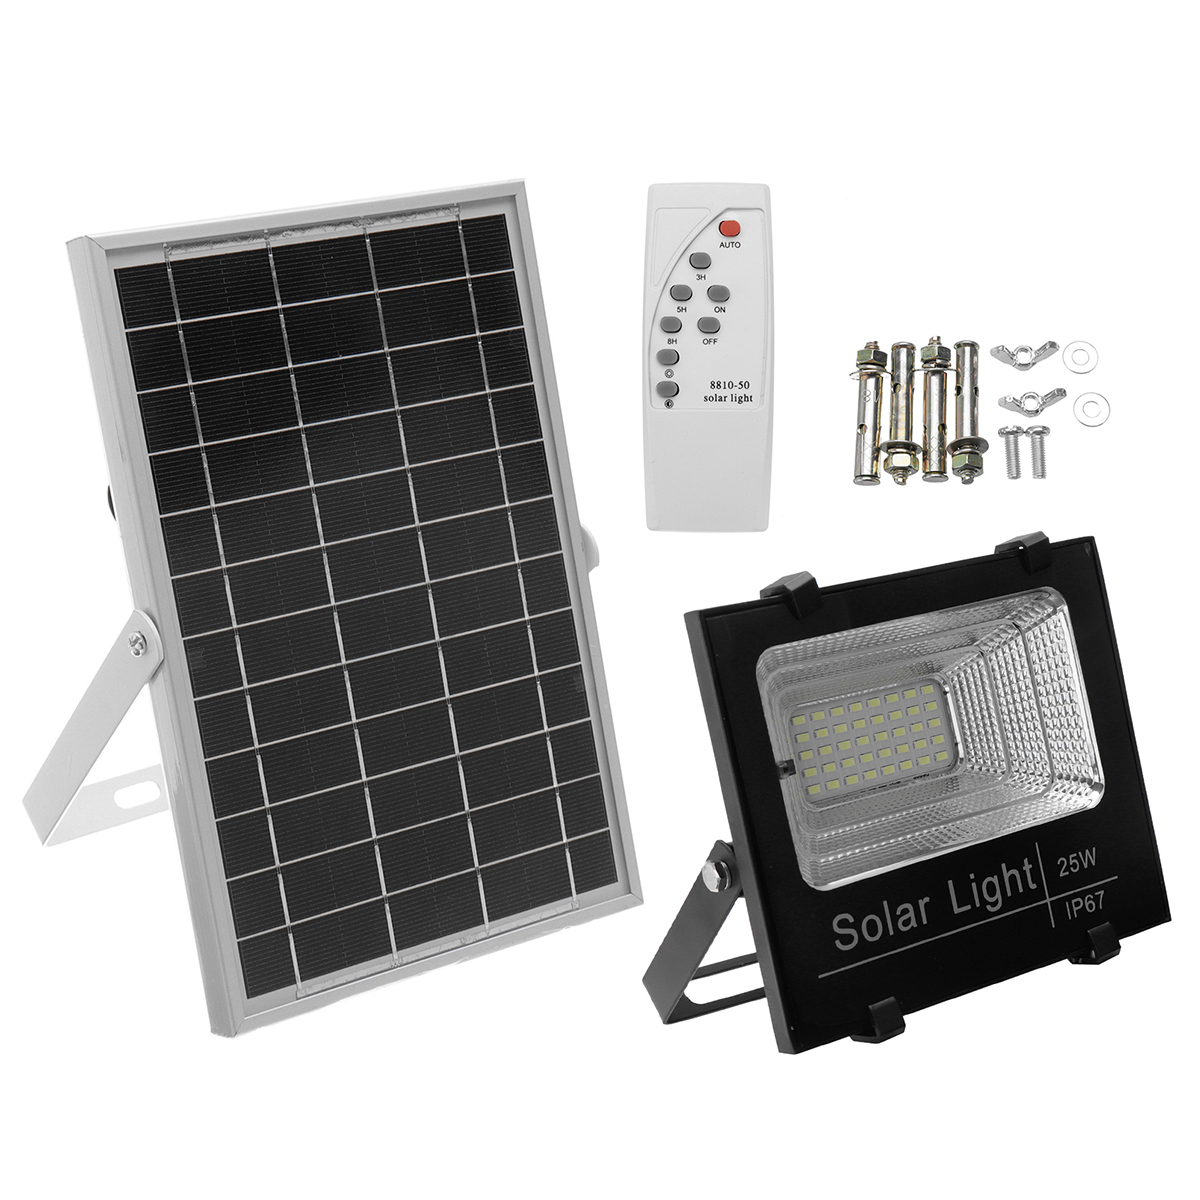 LED Solar Flood Light, High Output 25 Watt, With Solar Panel, Dimmable,  Timer Remote Control, IP67, 6000 Kelvin, Five Year Warranty